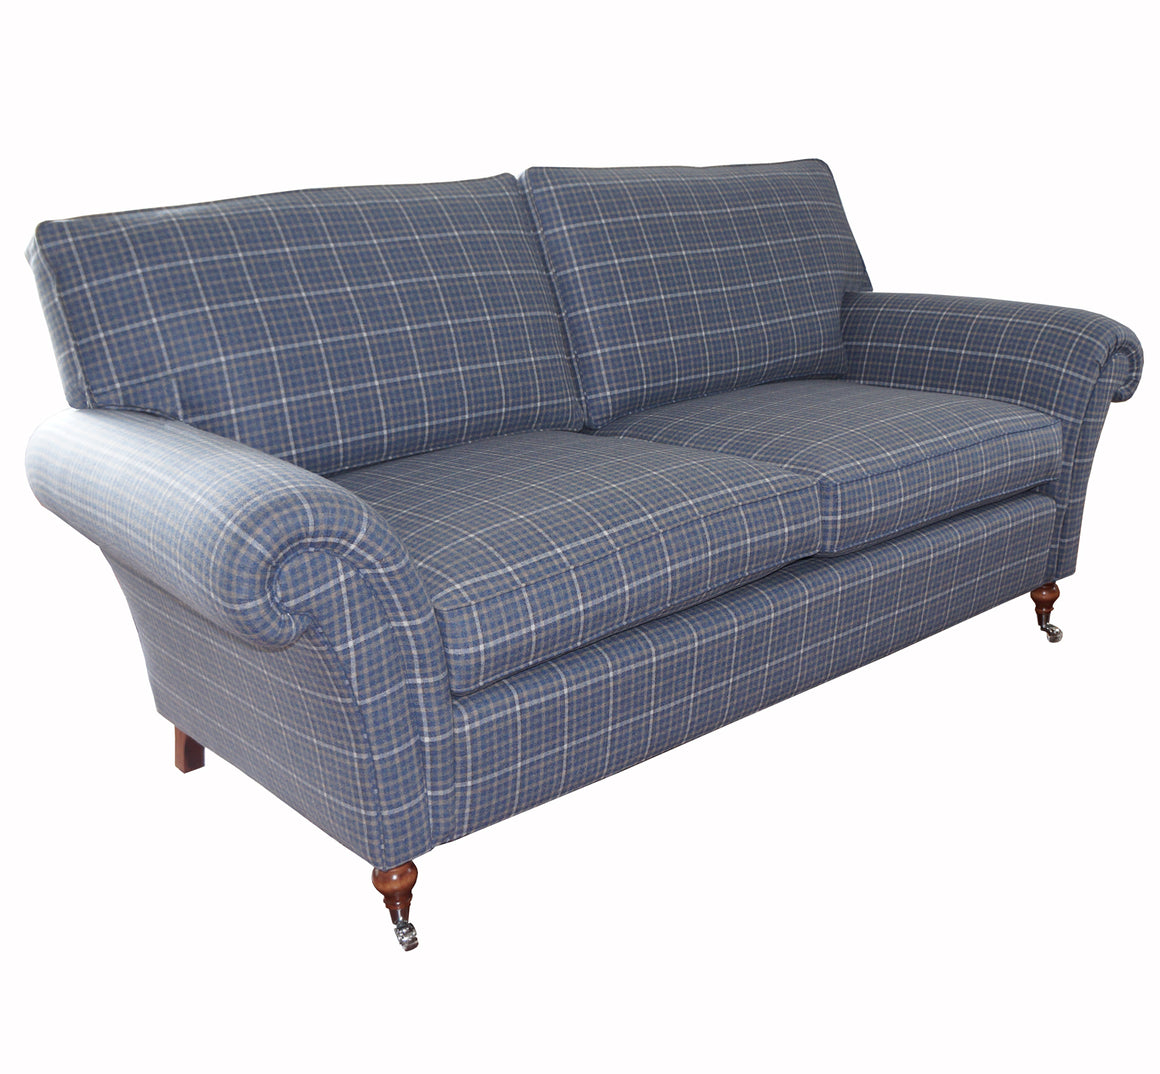 Henley Sofas and chairs HALF PRICE TO ORDER